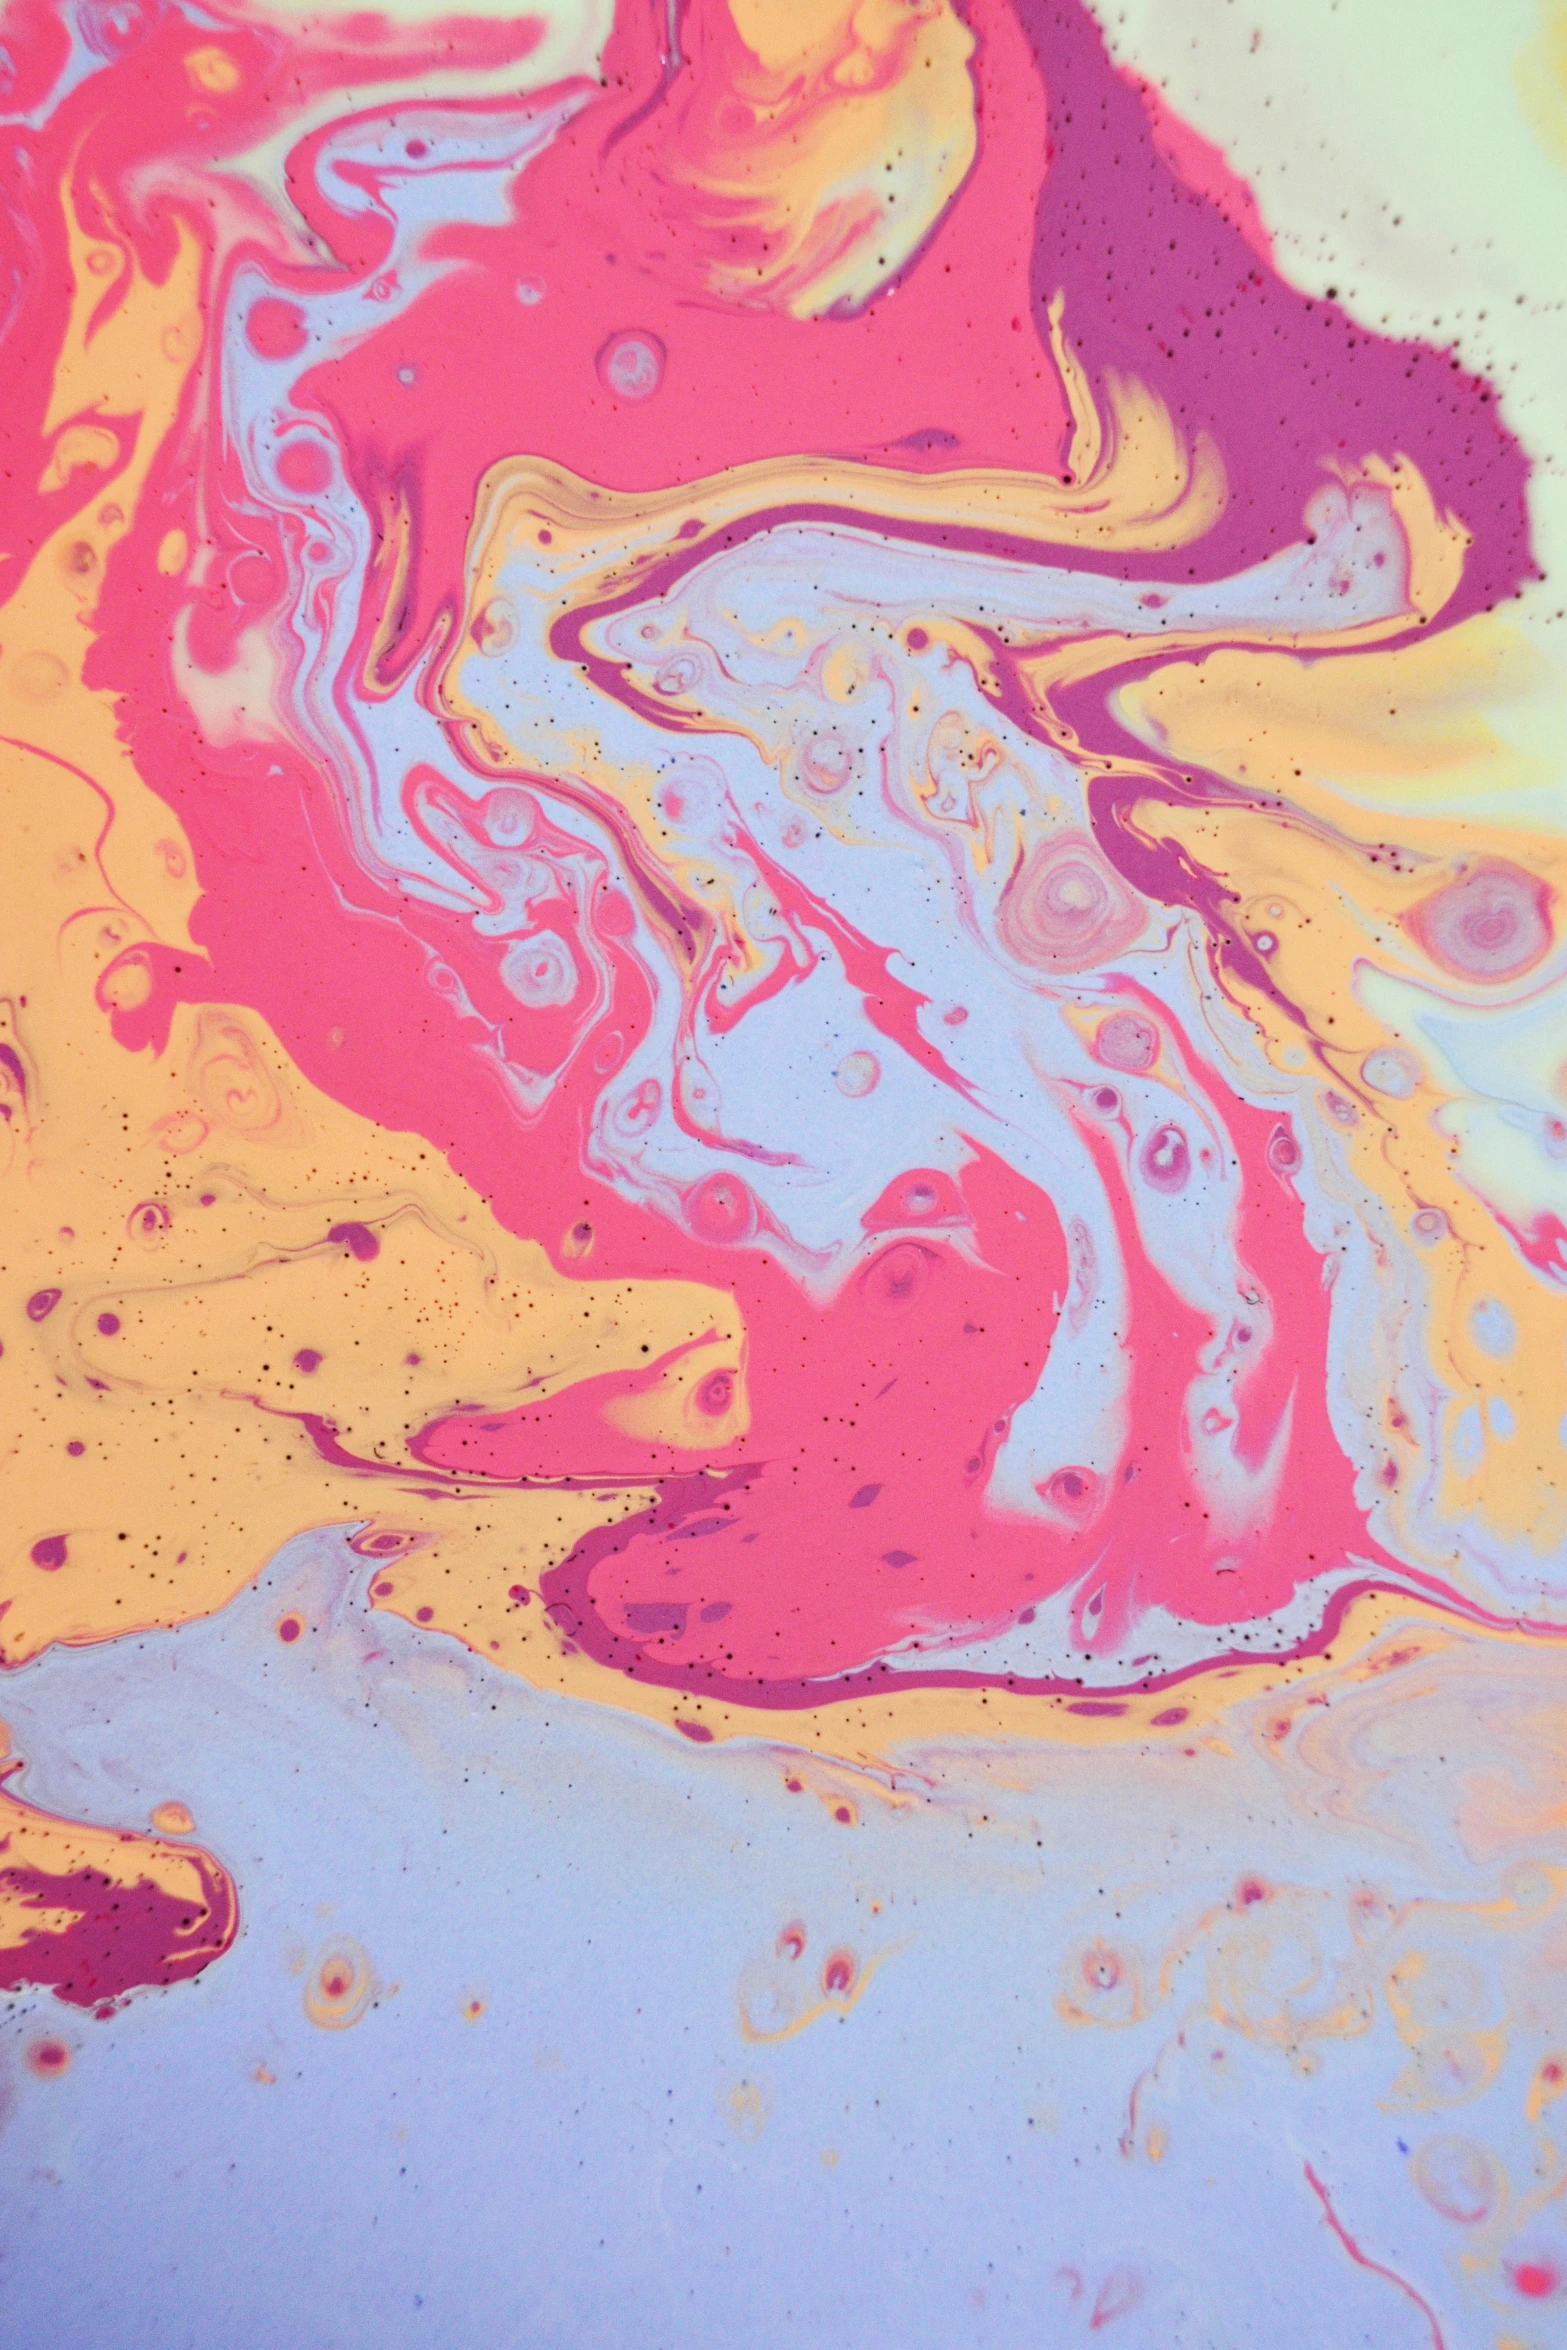 a close up of a painting on a table, trending on unsplash, abstract art, marbled swirls, pink and yellow, made of liquid, ecstasy